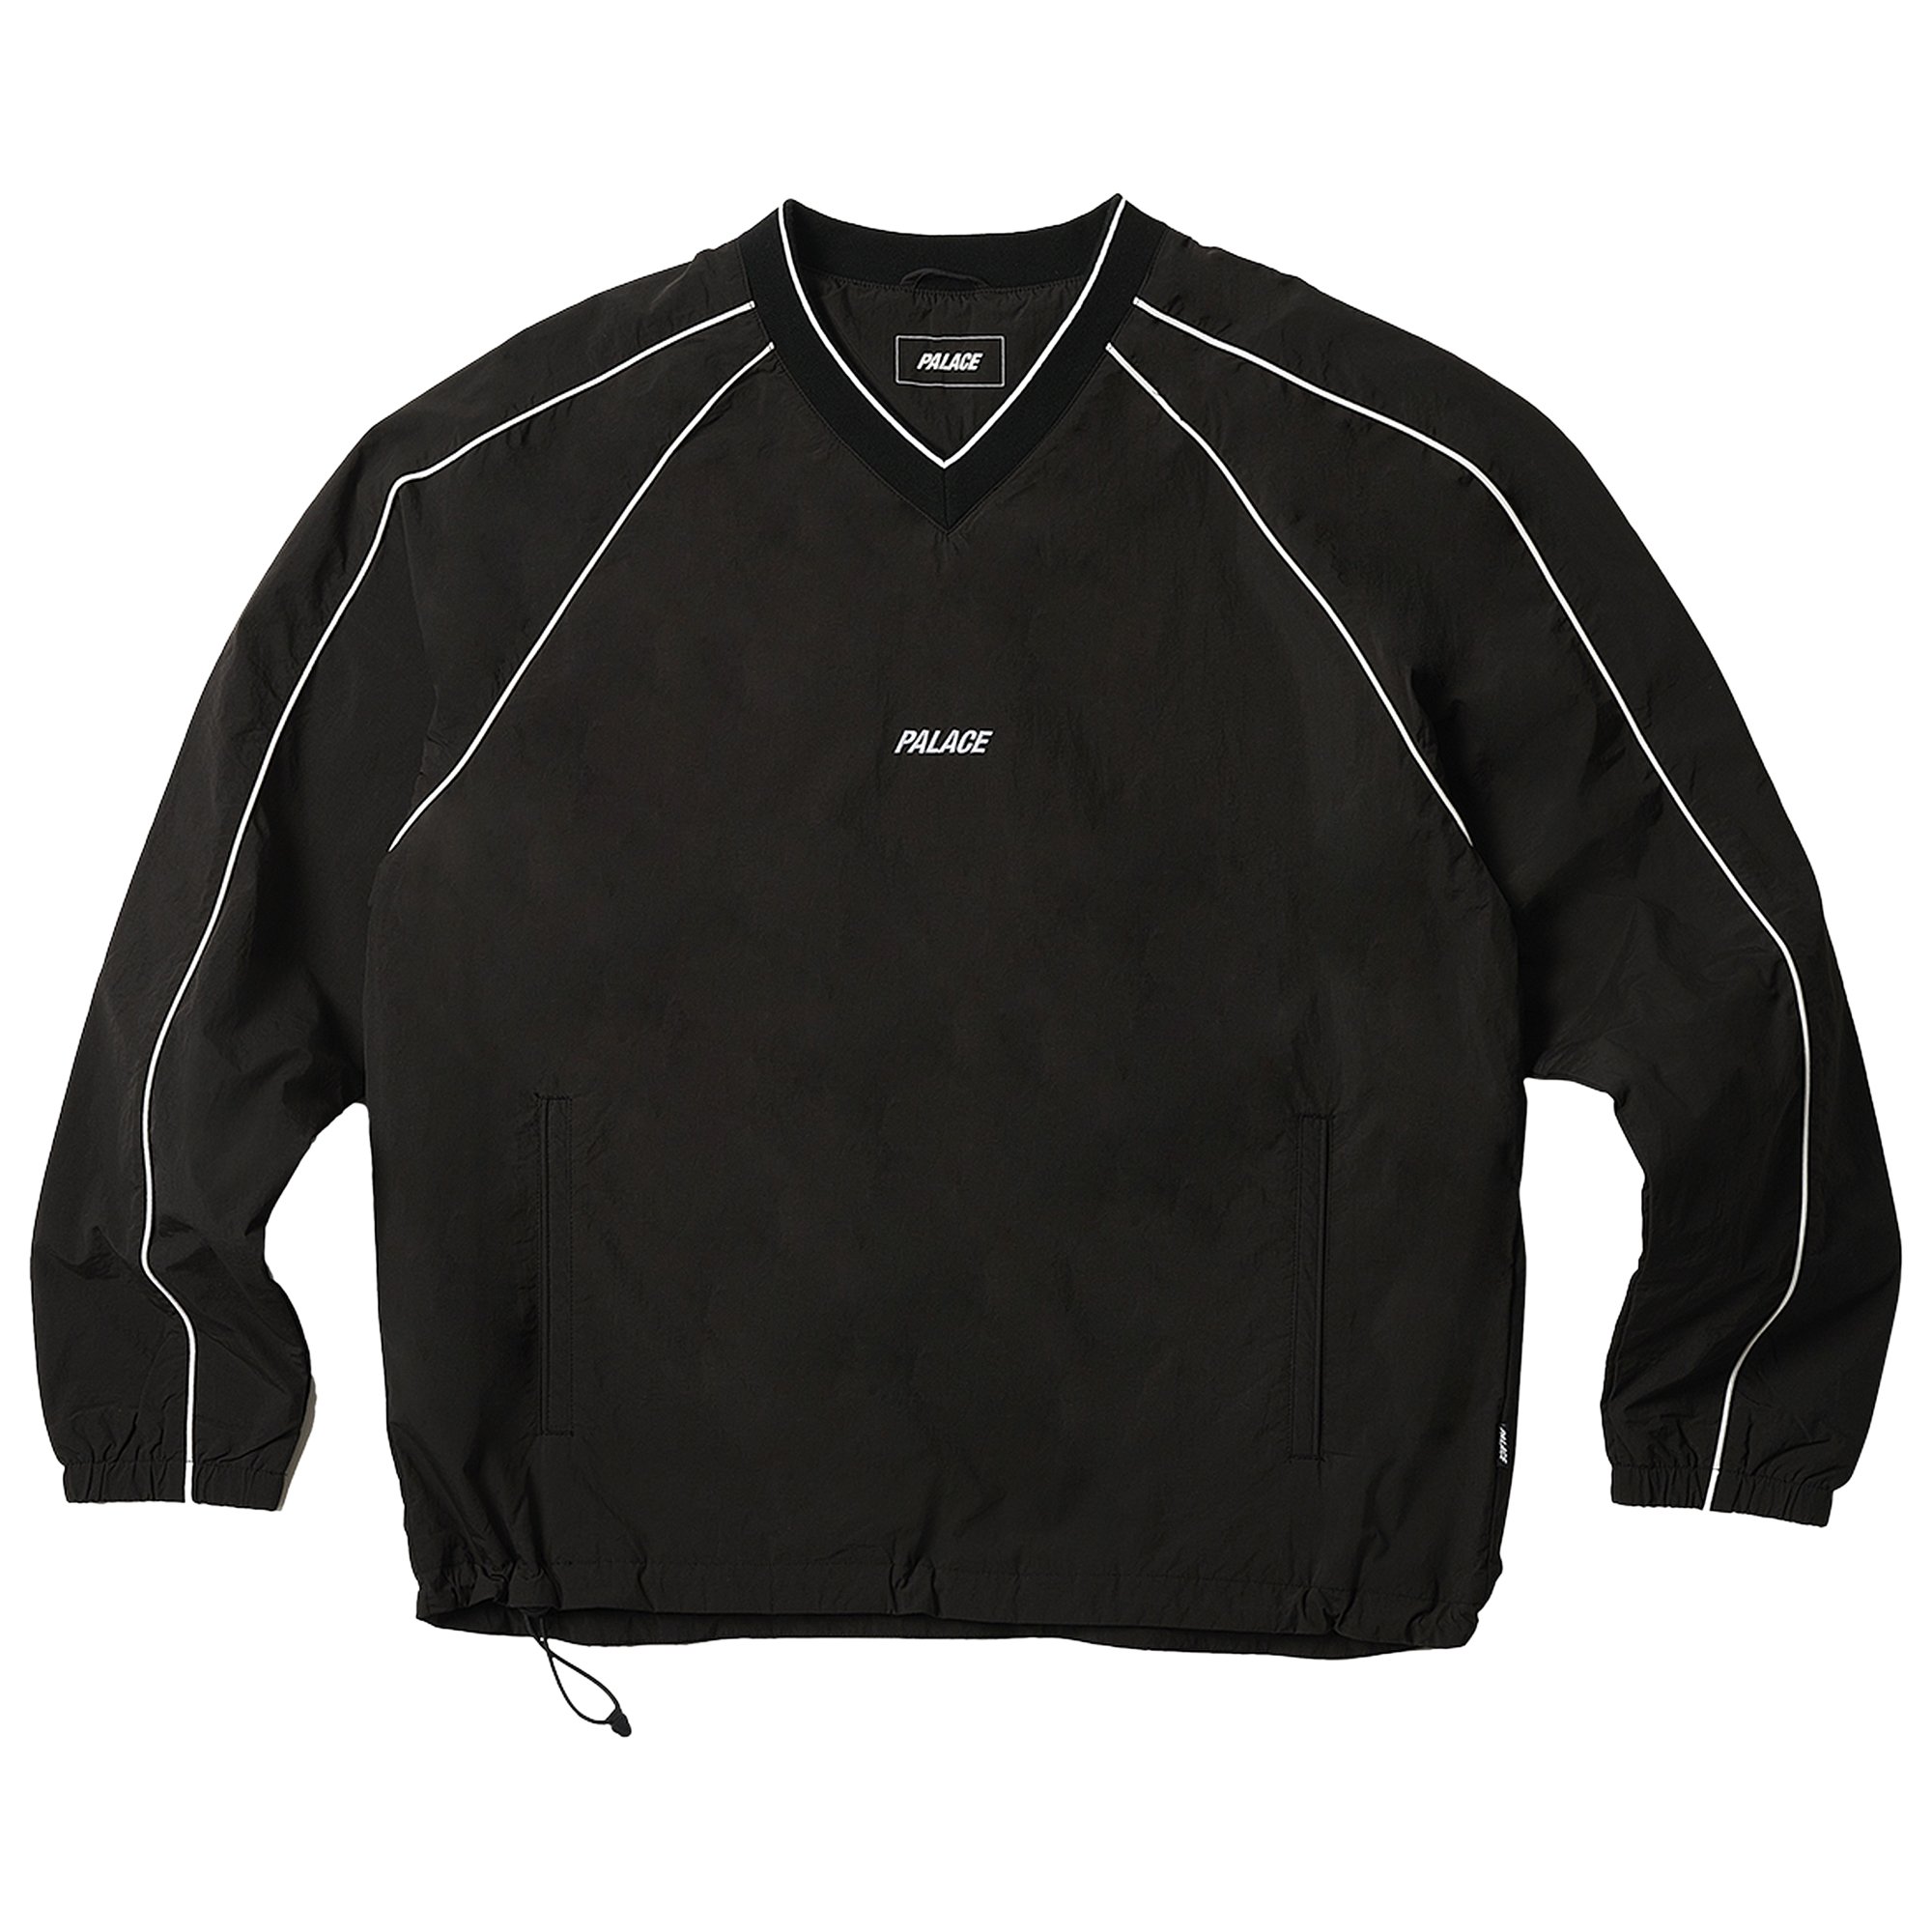 Buy Palace Piped Shell Pullover 'Black'   PJK   GOAT UK